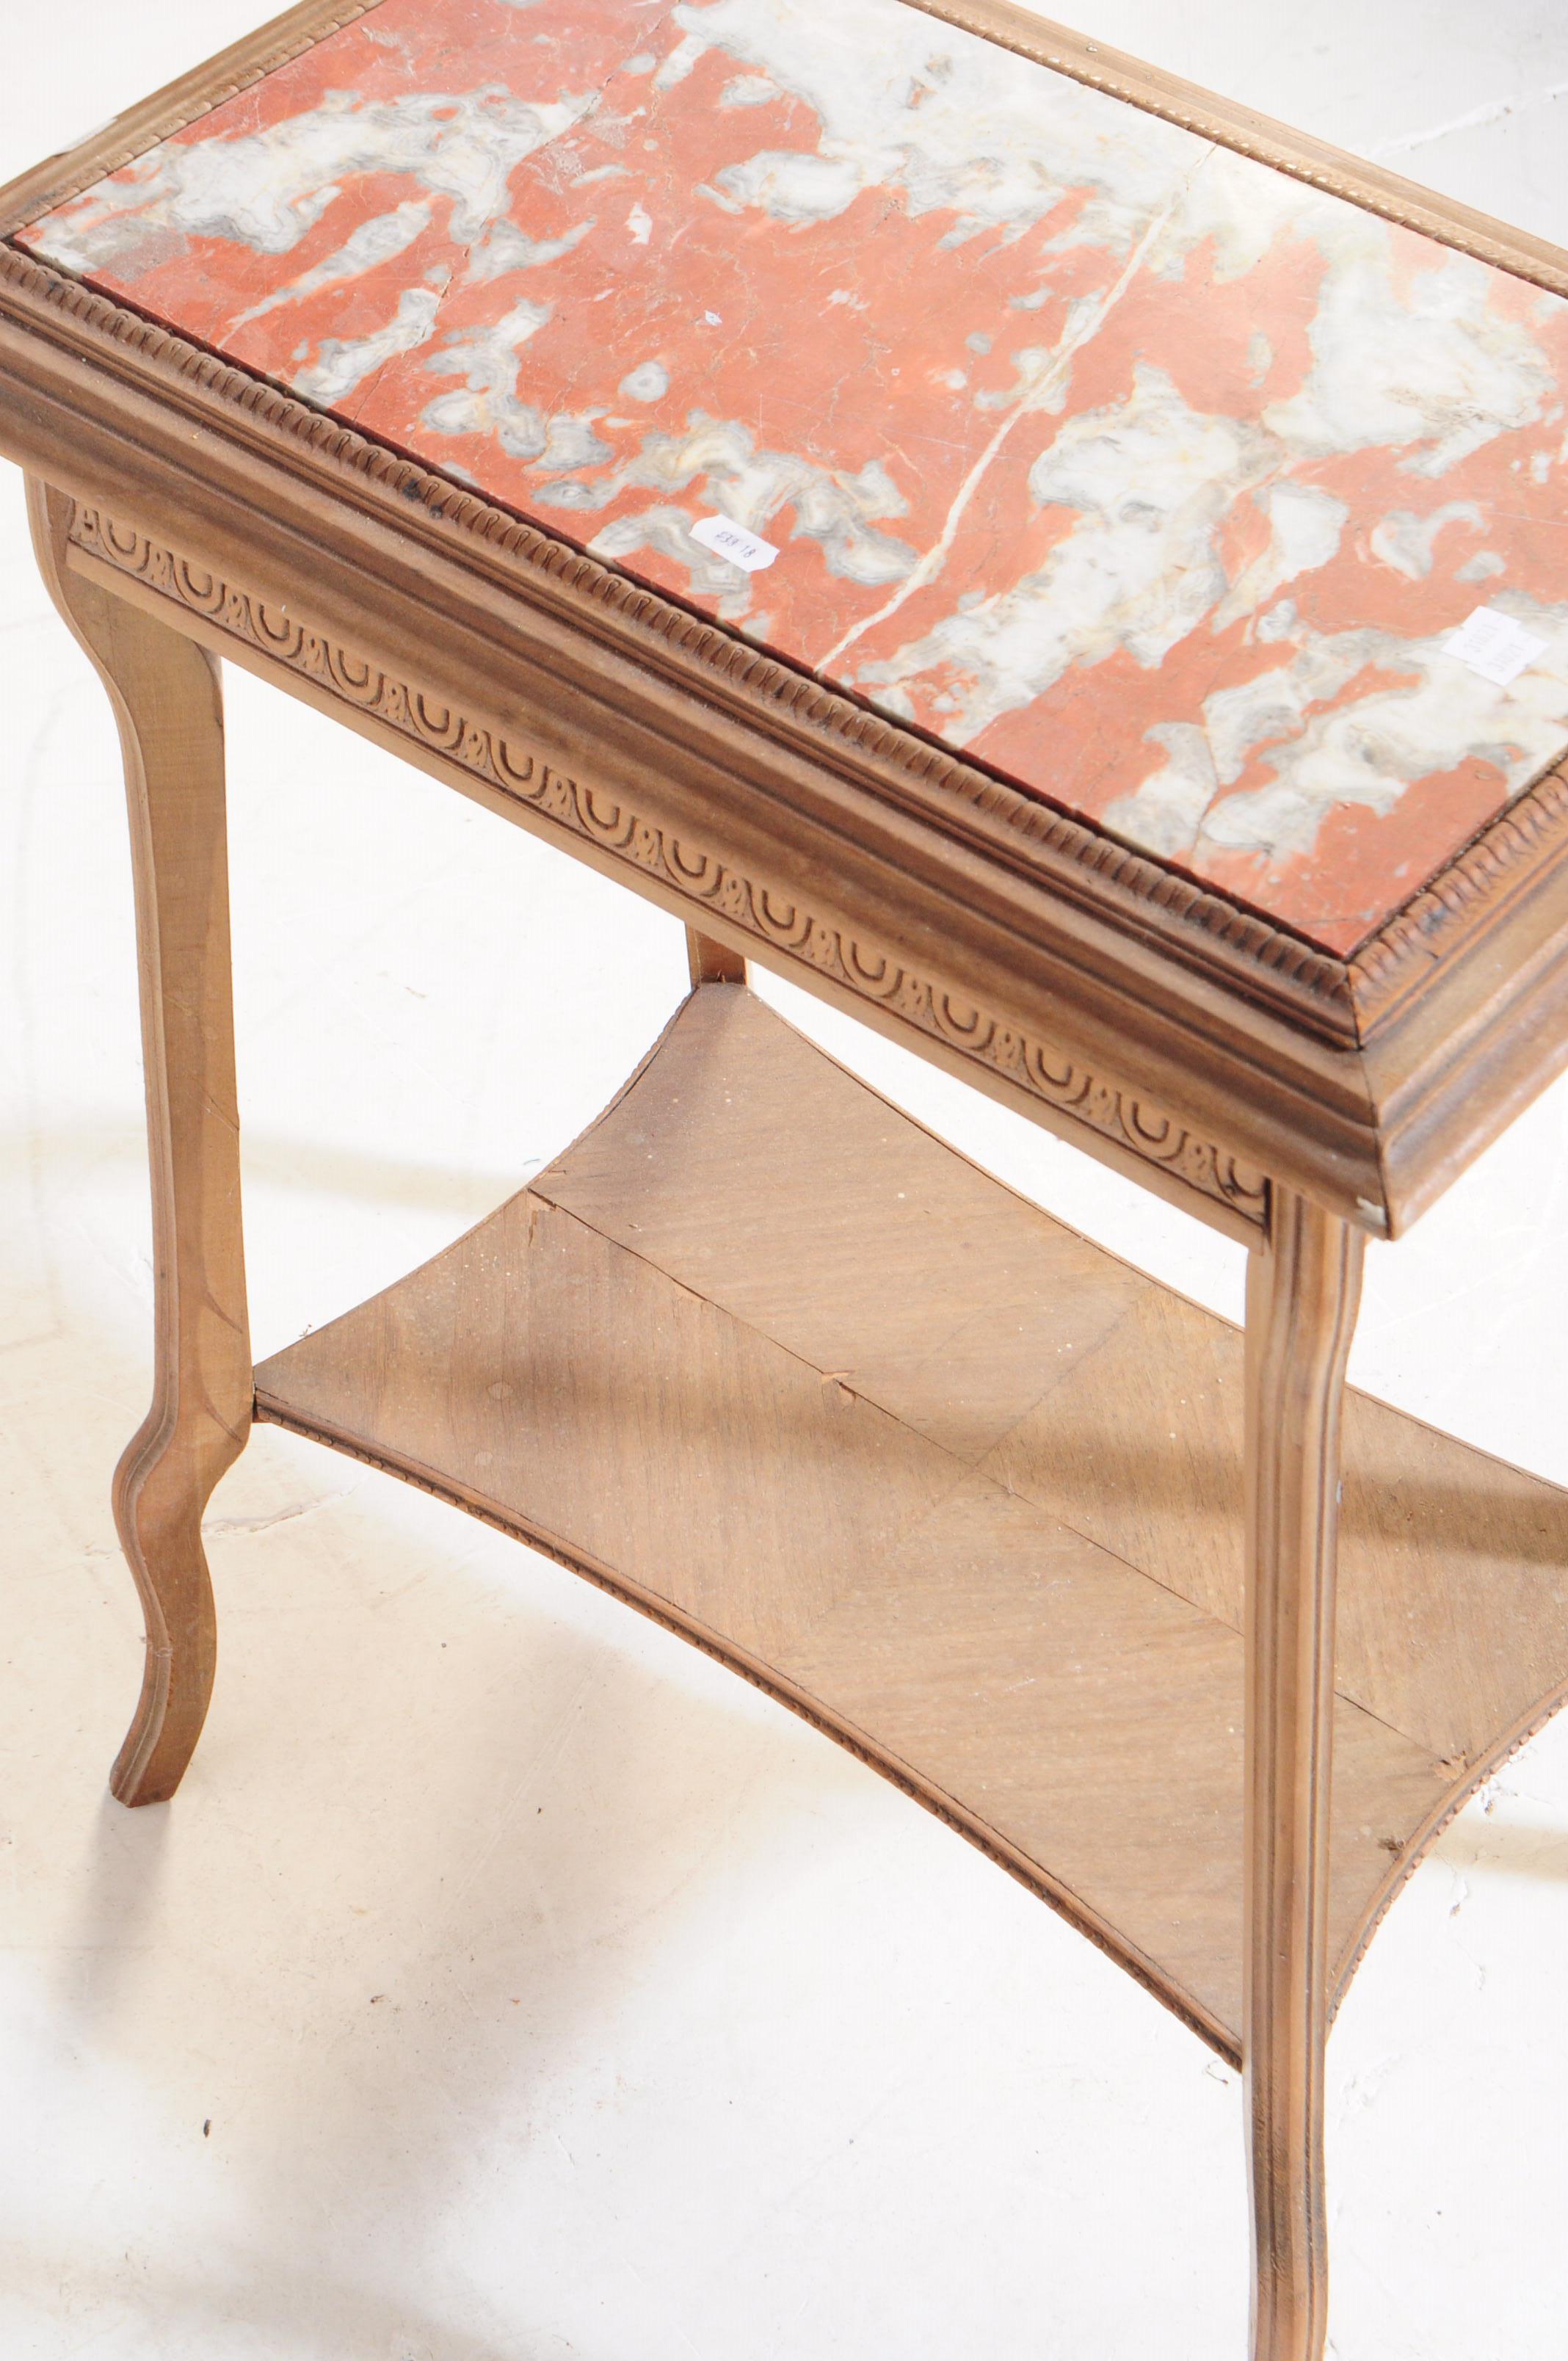 FRENCH EARLY 20TH CENTURY ARTS & CRAFTS MARBLE TOP TABLE - Image 5 of 5